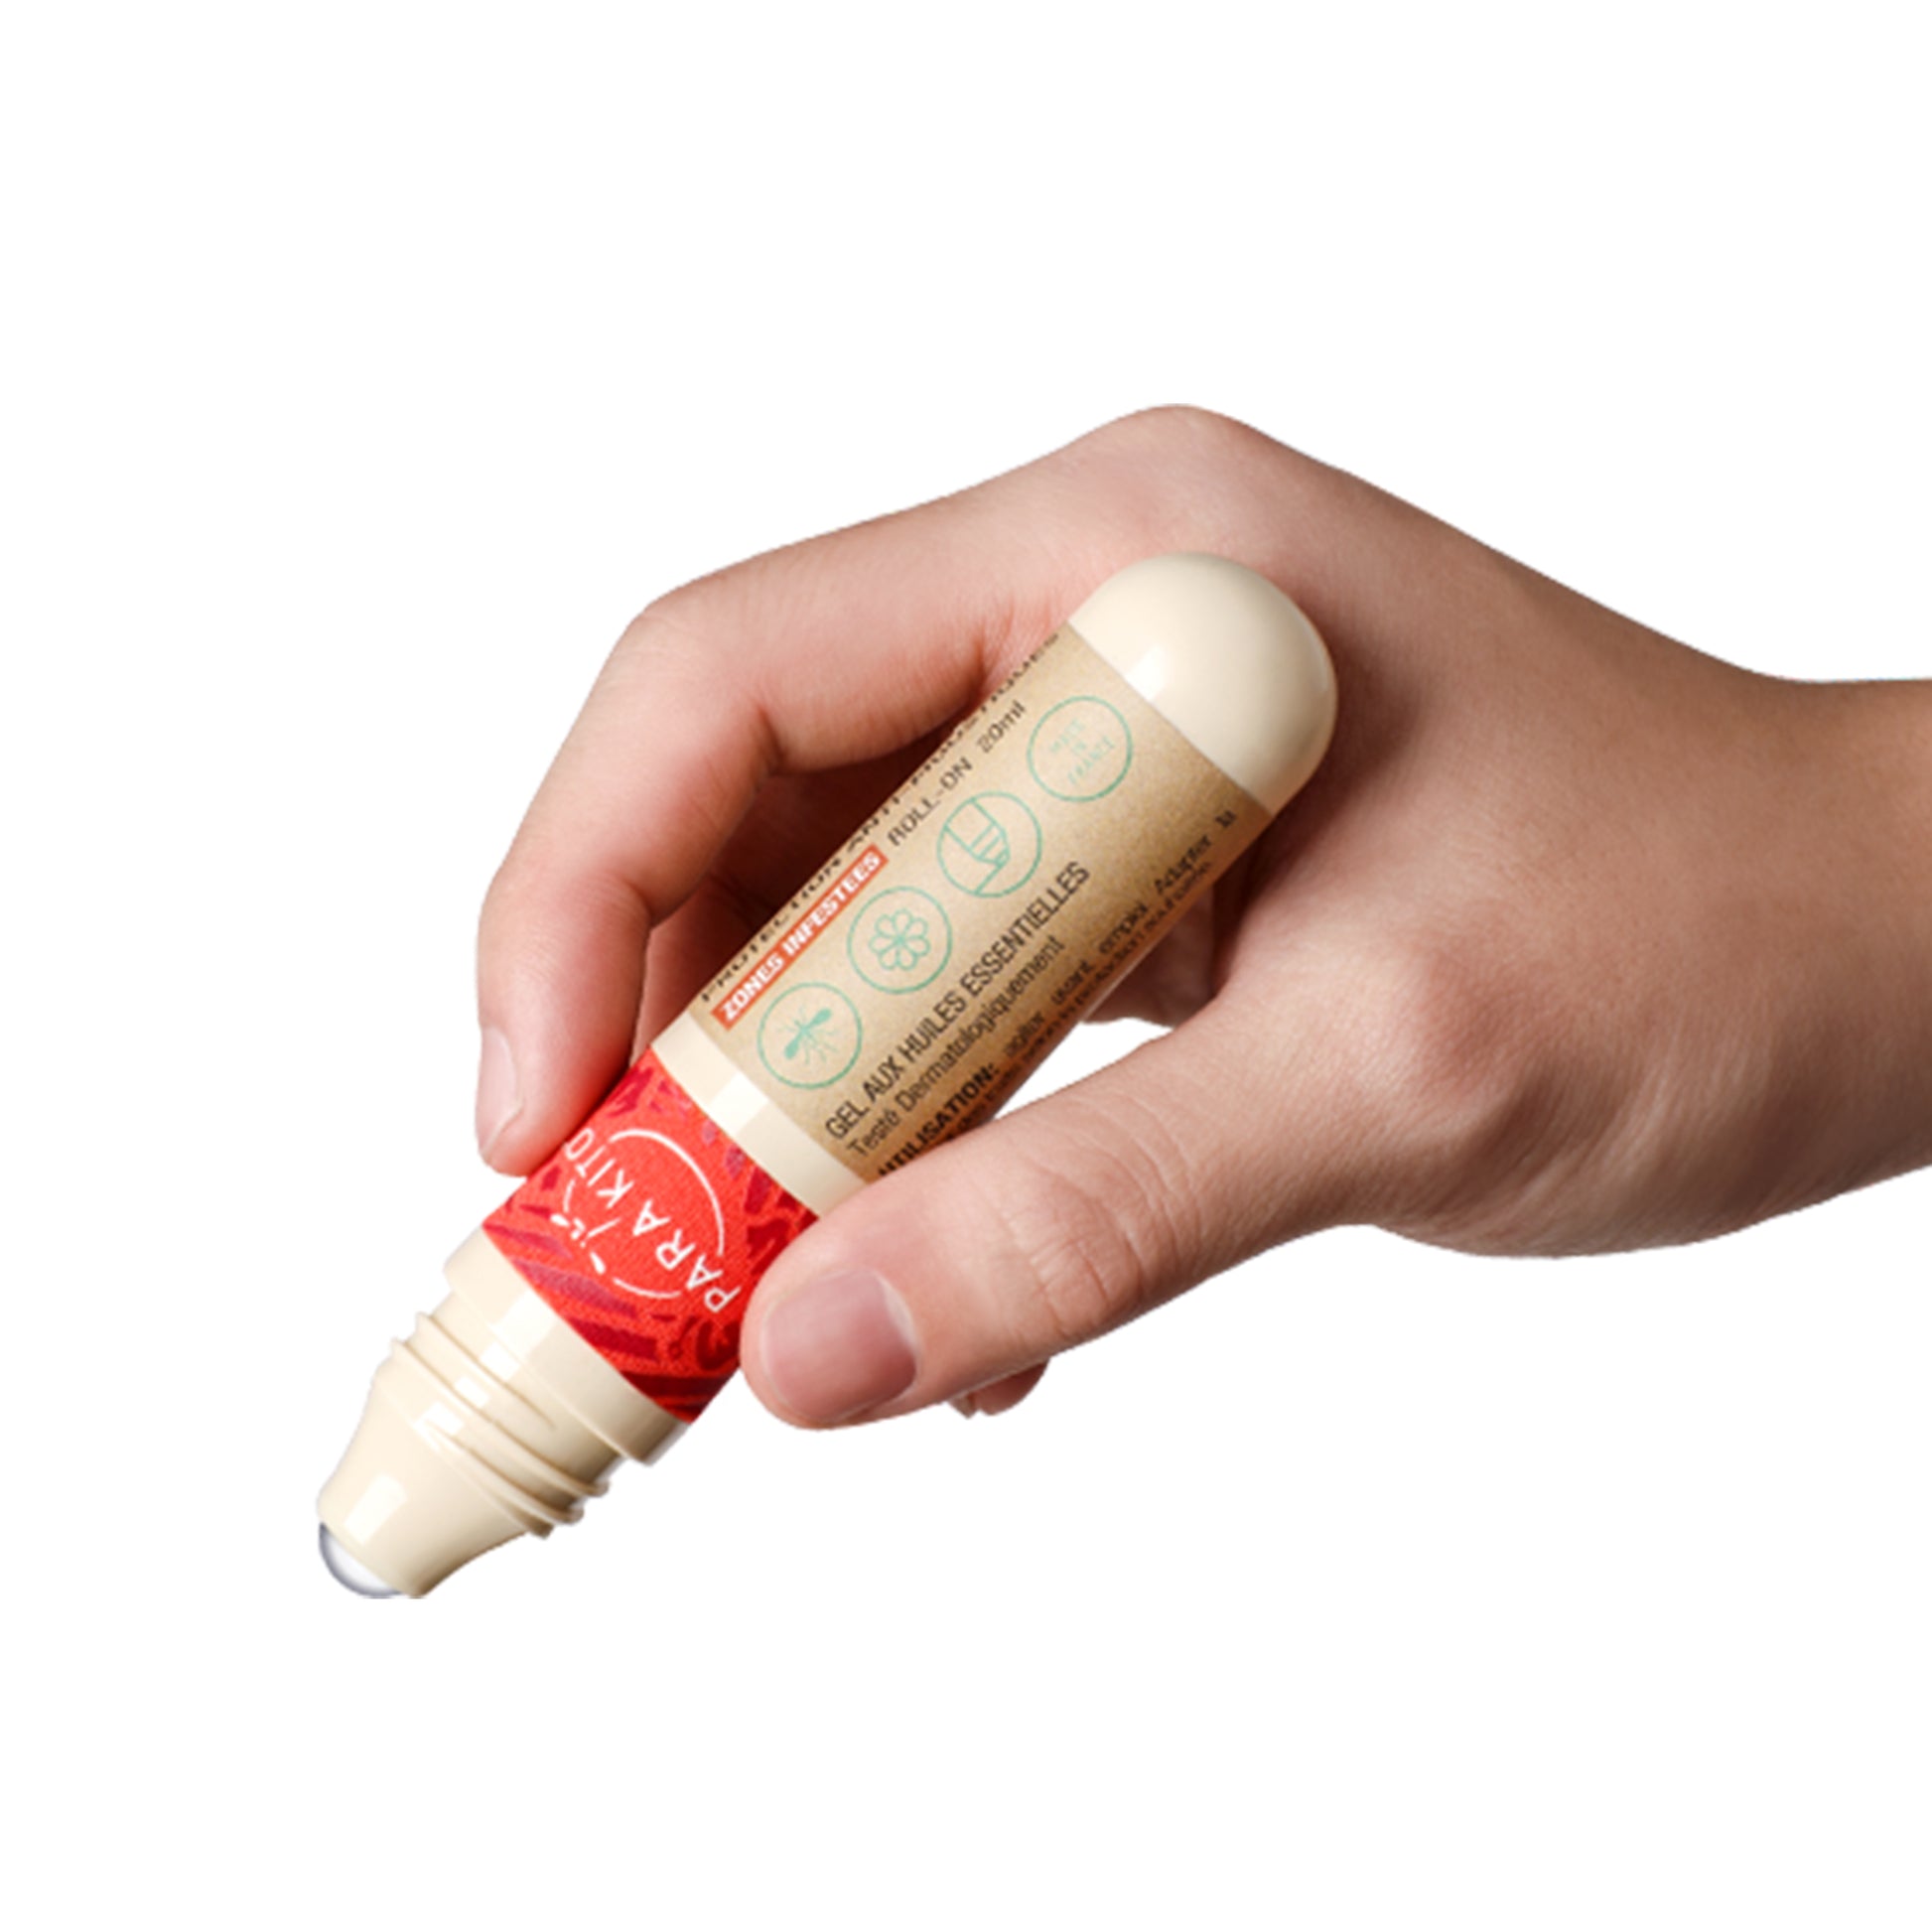 Parakito Mosquito Repellent Roll-on